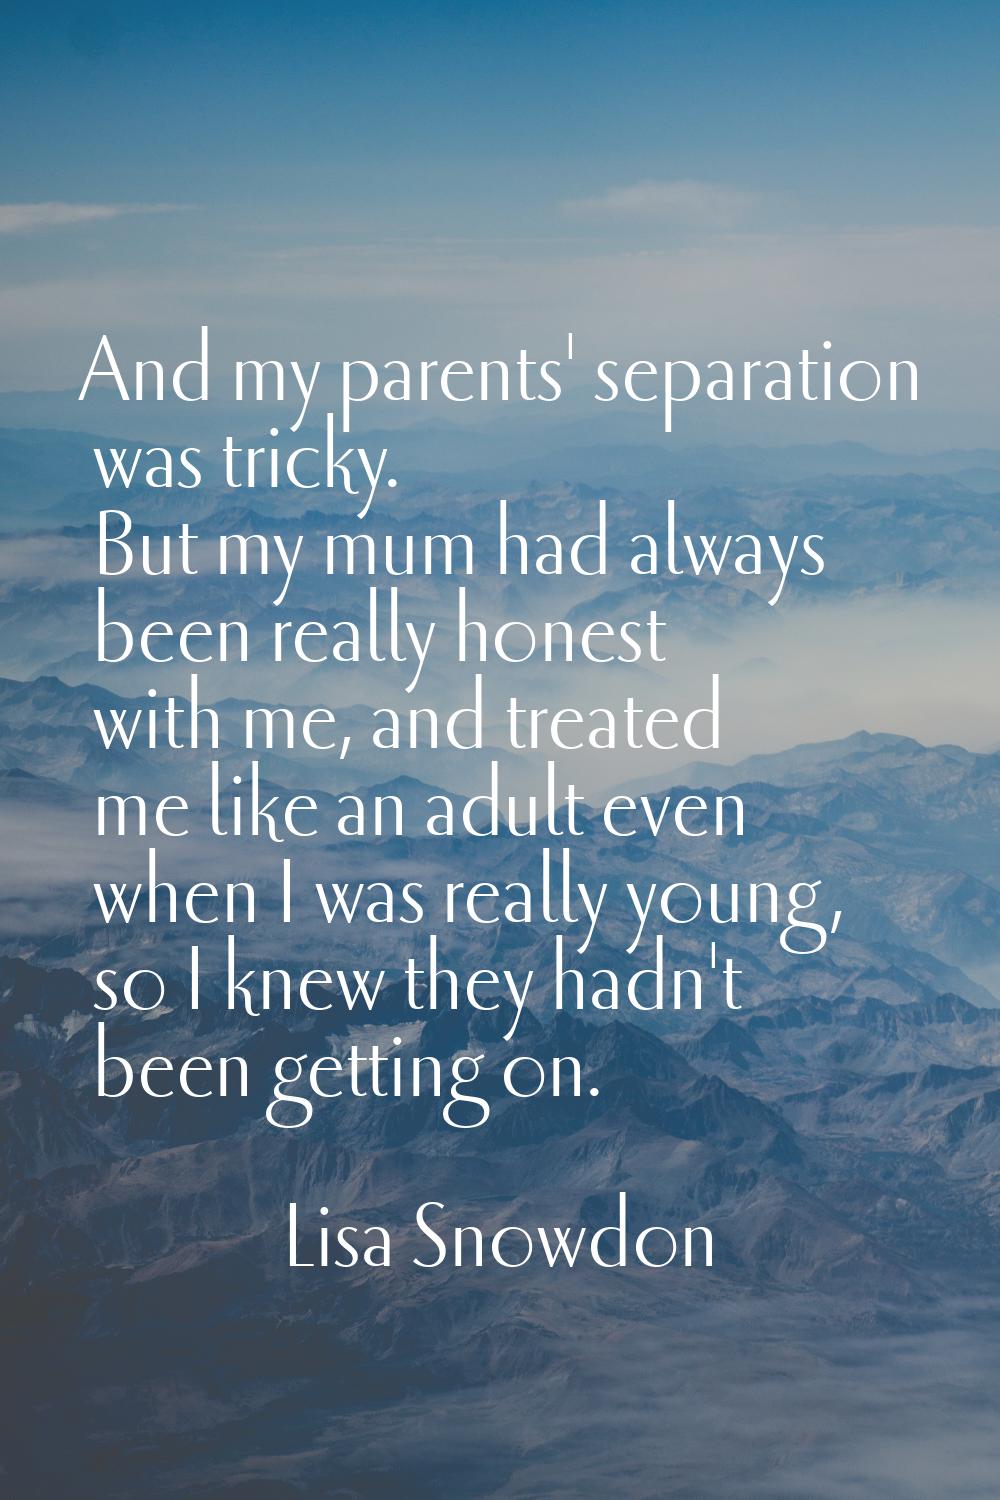 And my parents' separation was tricky. But my mum had always been really honest with me, and treate